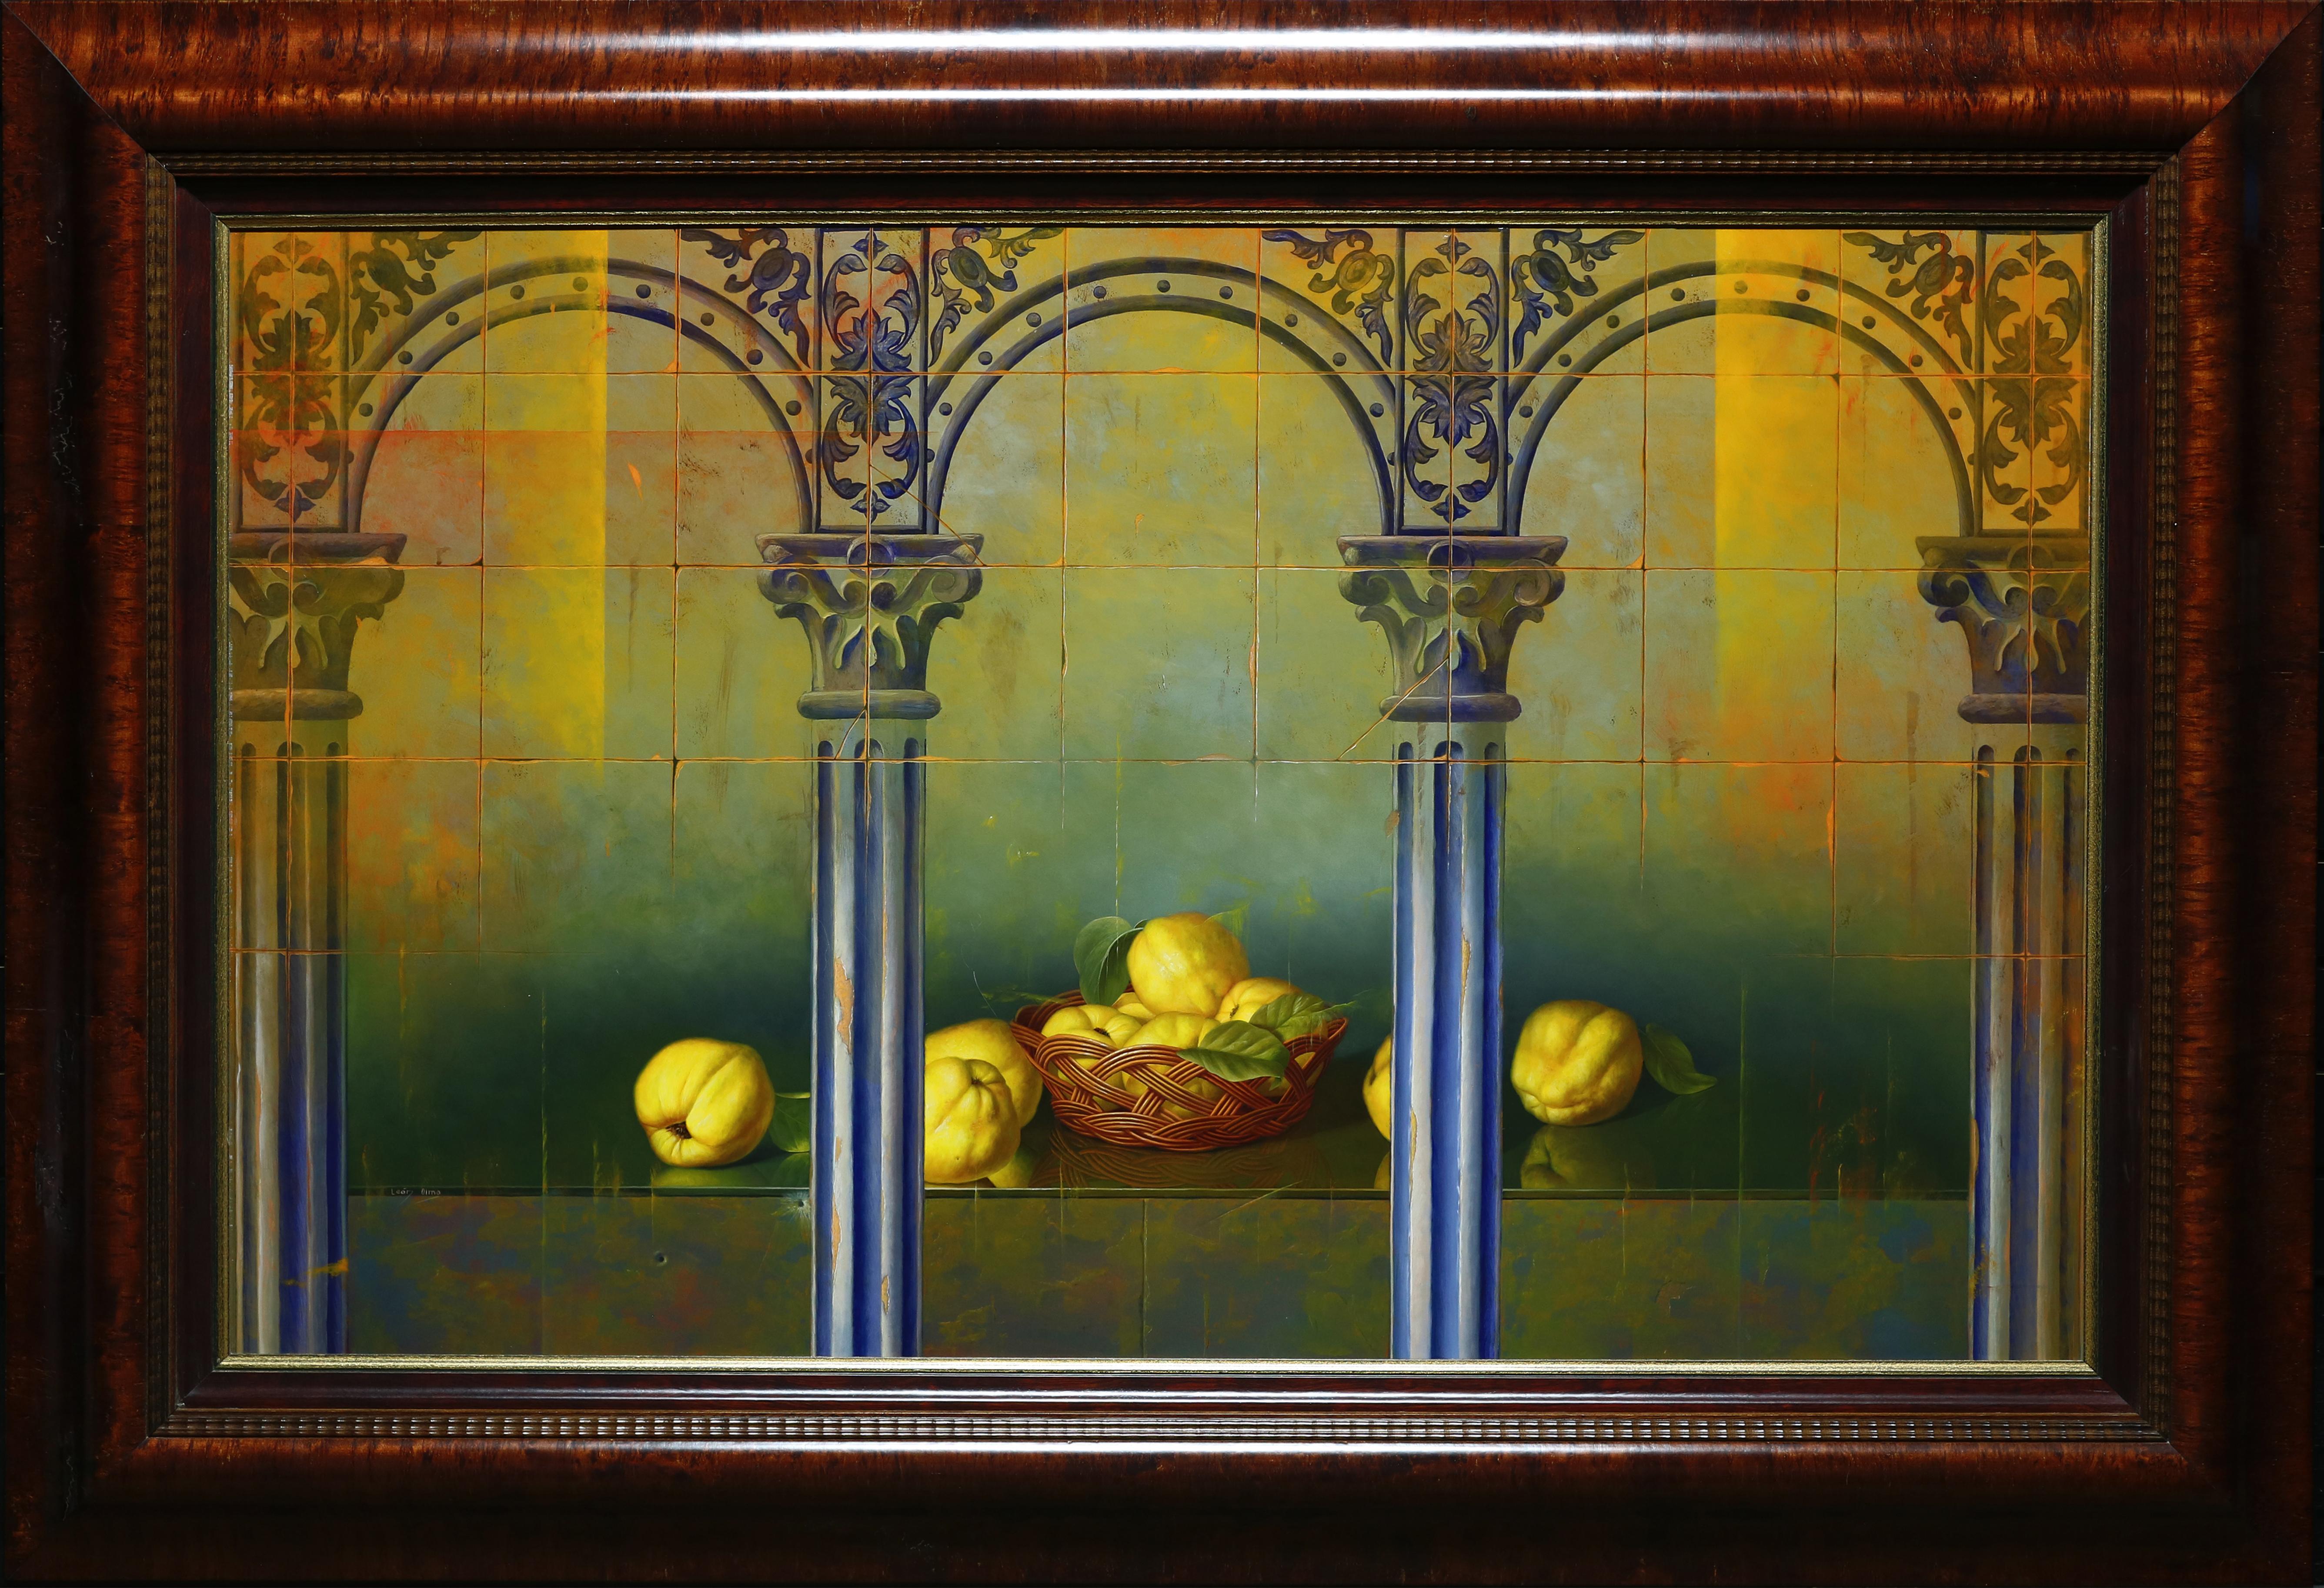 "Still Life with Architectural Columns and Pear" by Leon Olmo 31 x 52 inches